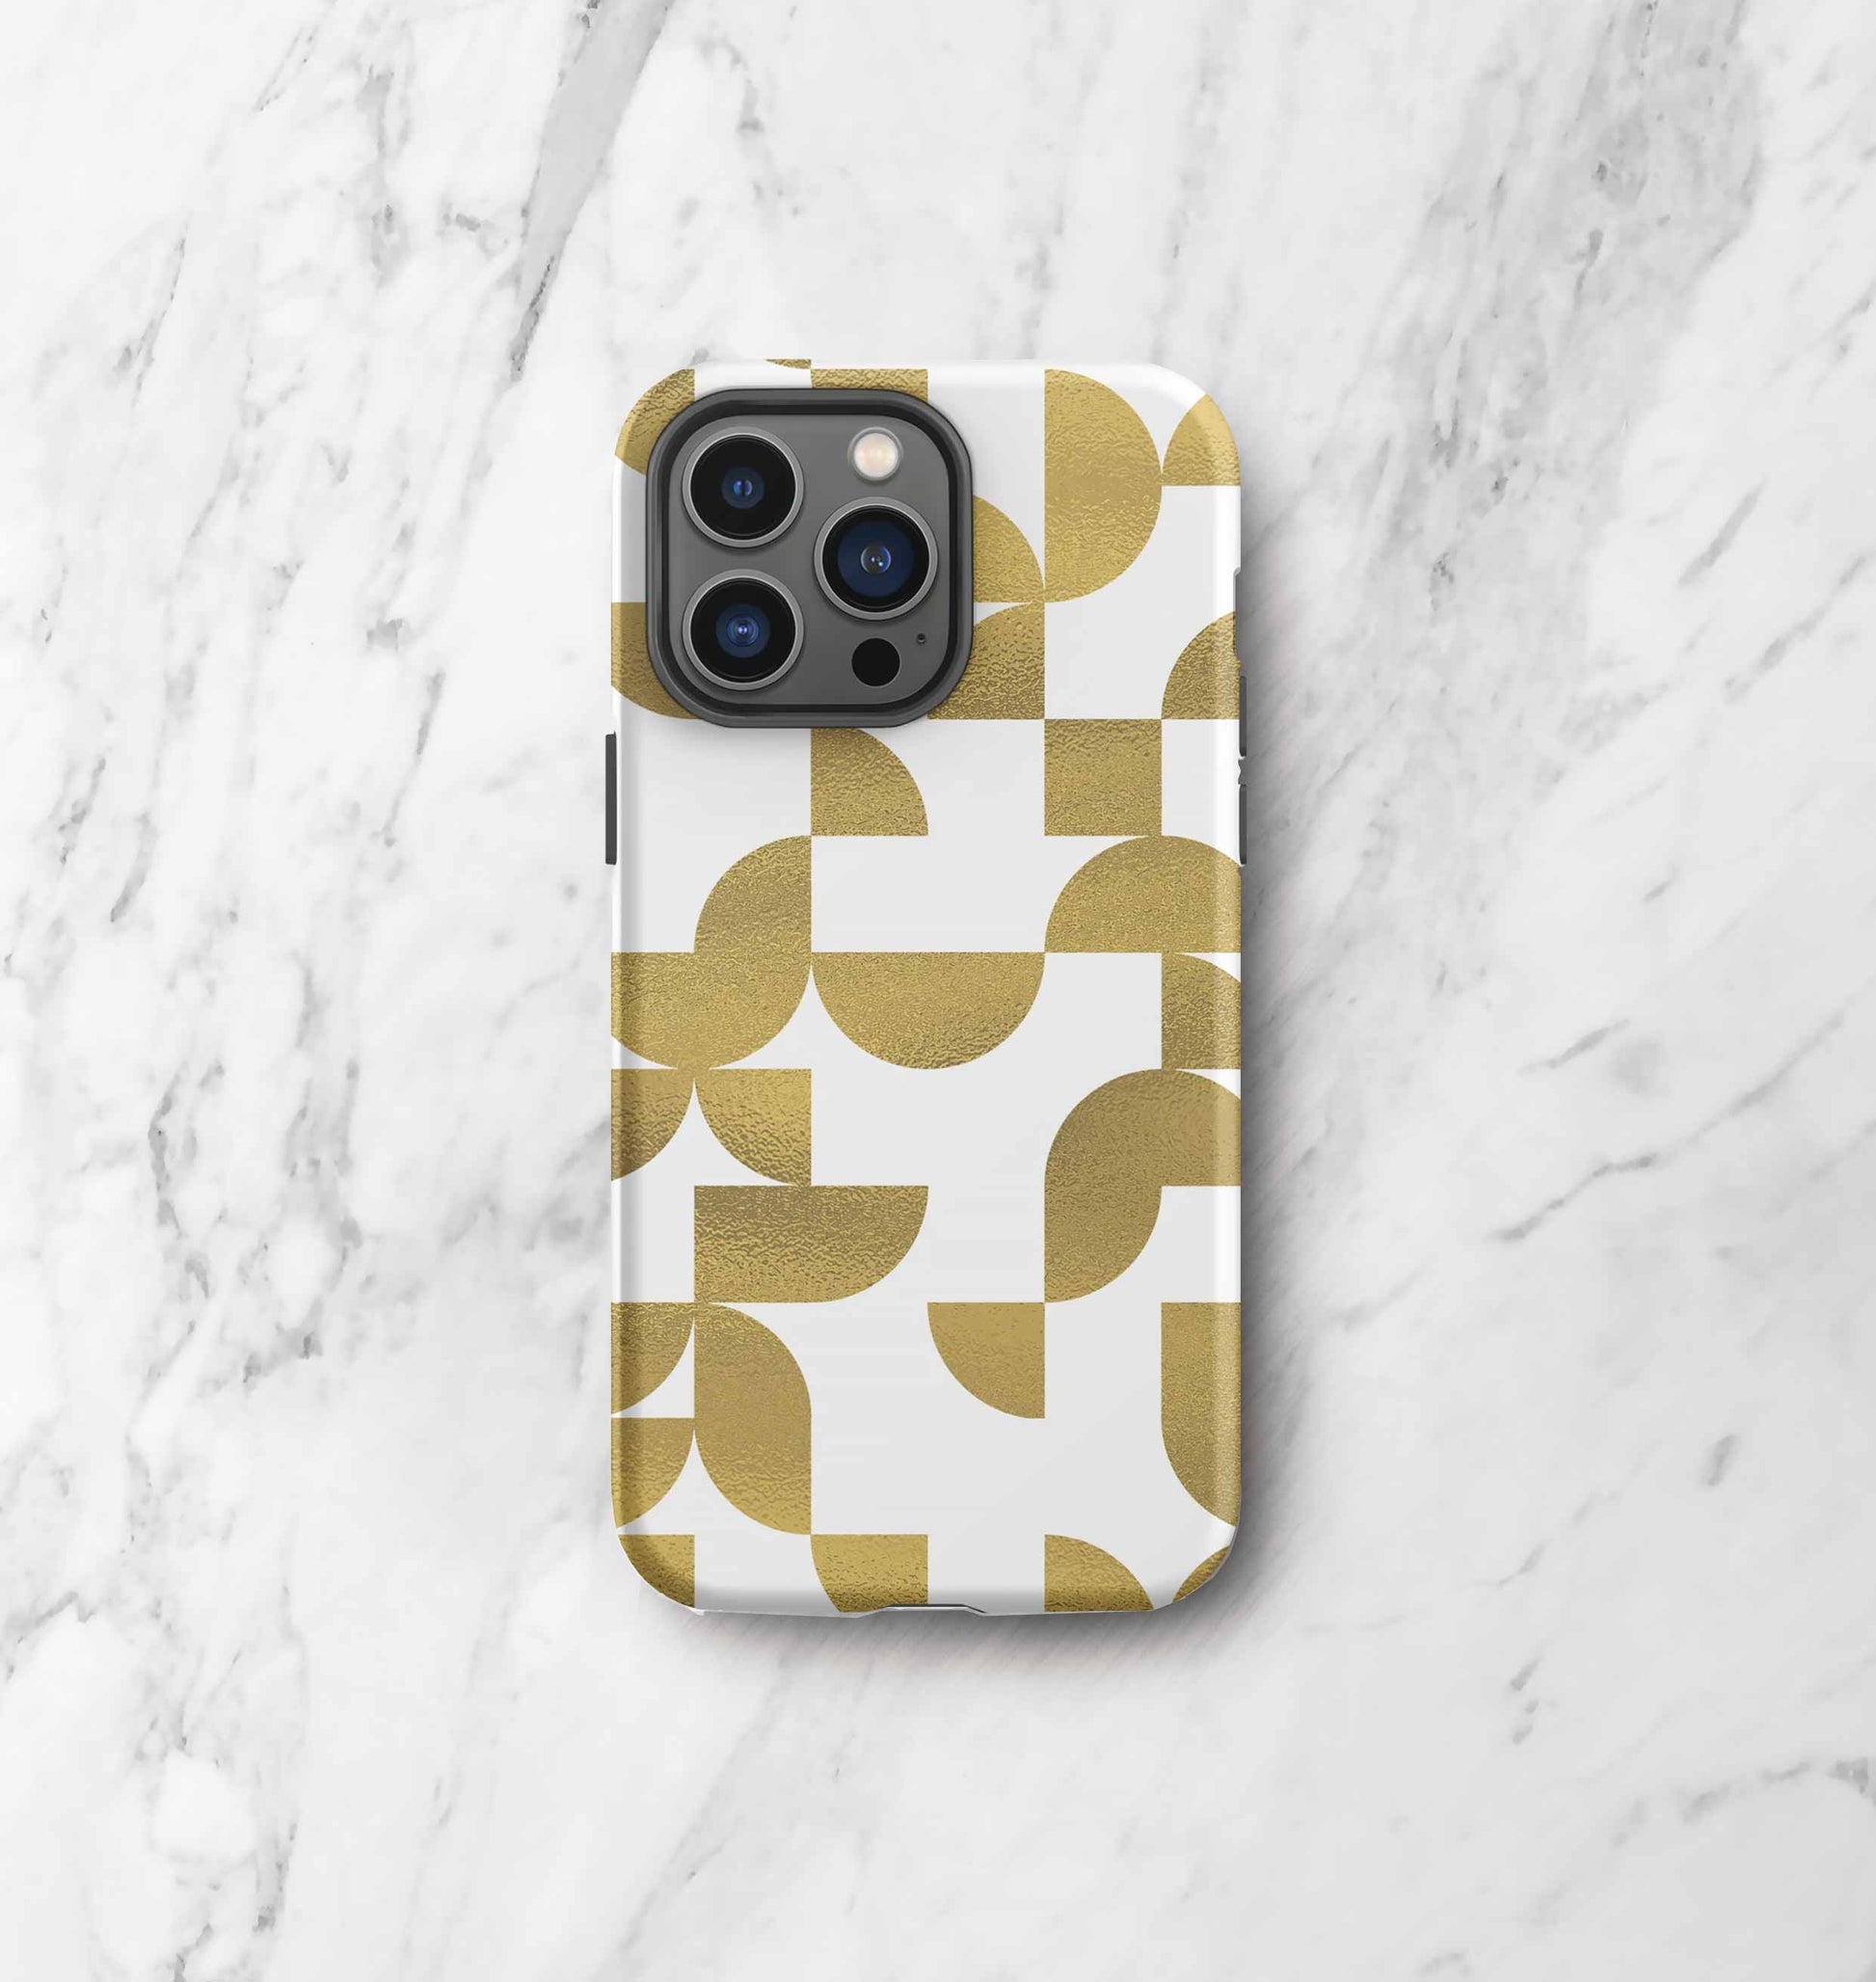 Front view of iPhone tough case in Geometria I gold design on a marble countertop